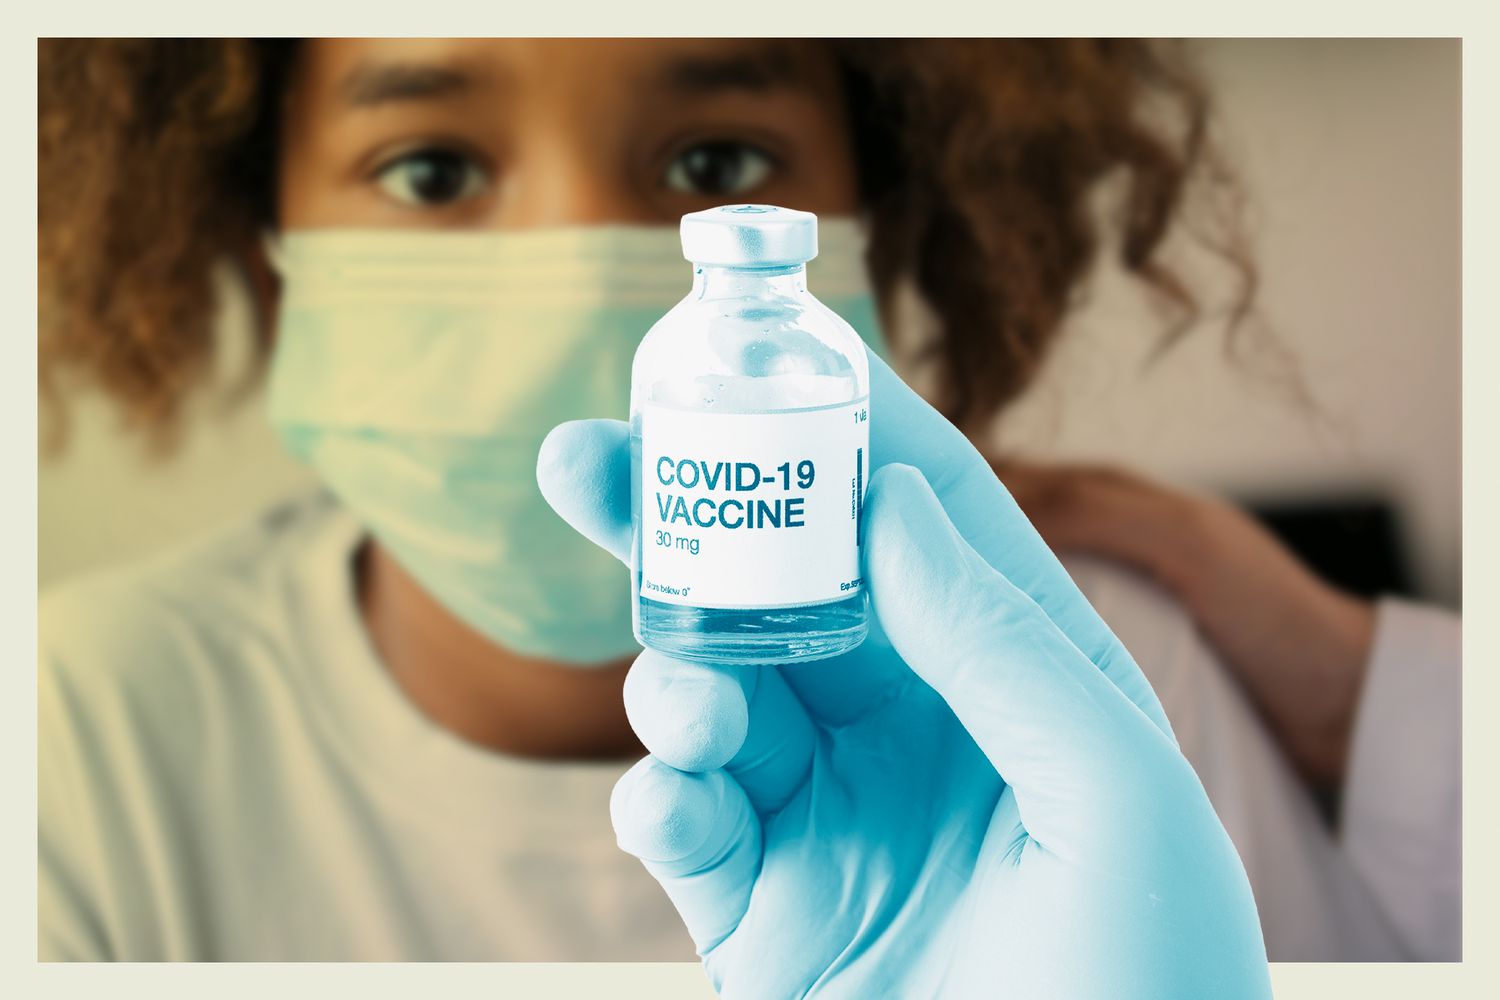 A hand holding a COVID-19 vaccine bottle with a young girl in the background wearing a mask